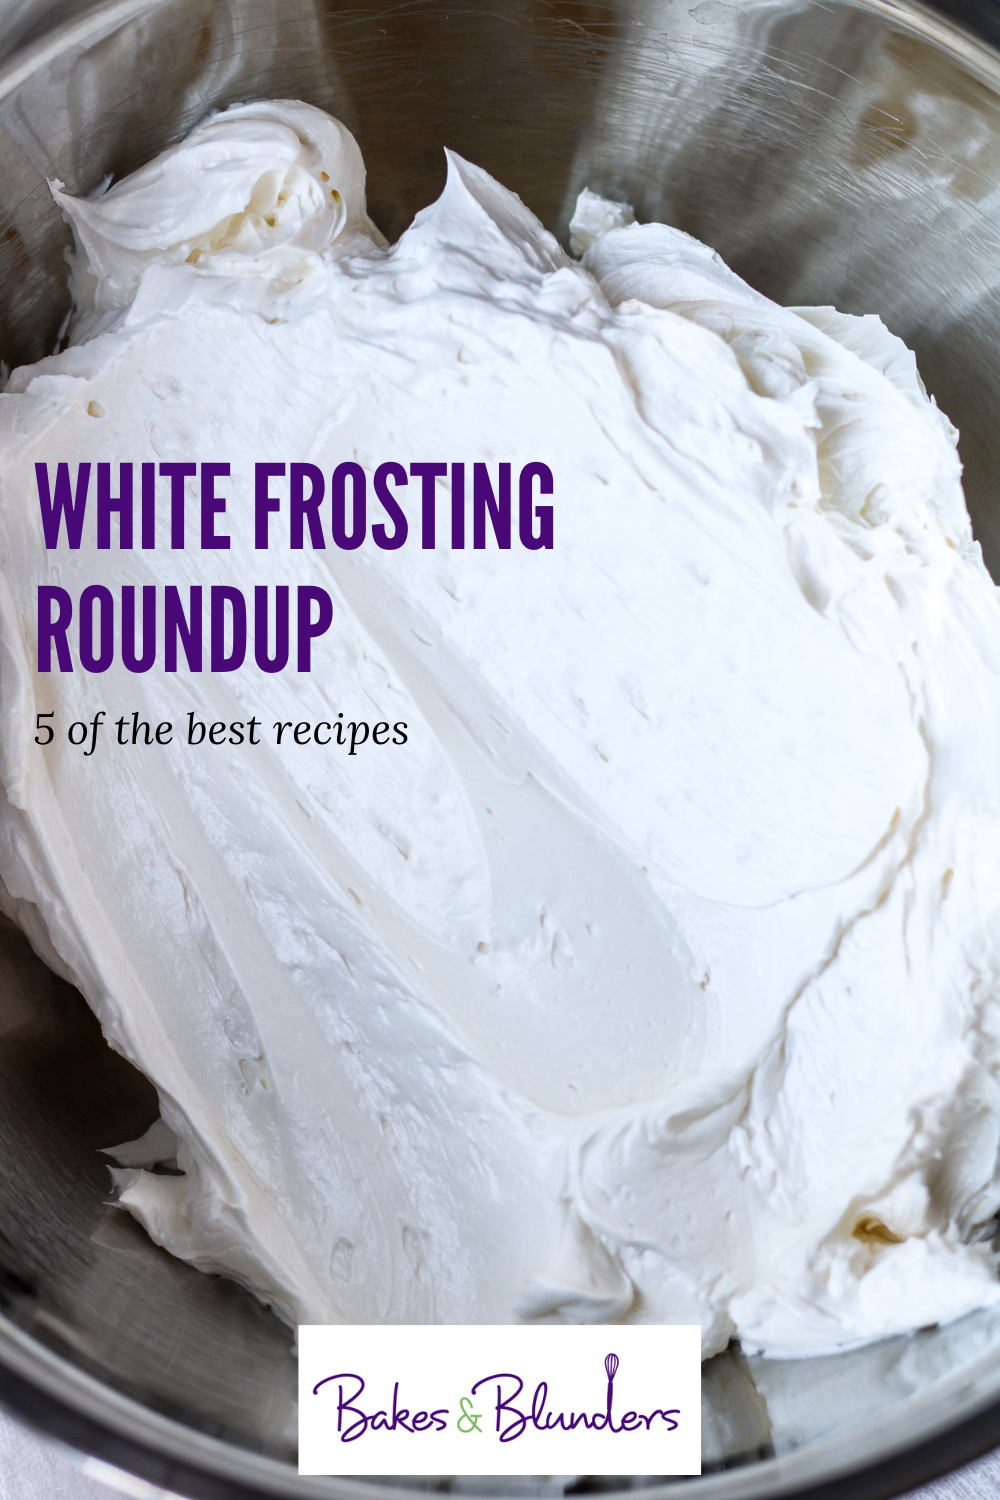 White Frosting Recipes | Bakes & Blunders